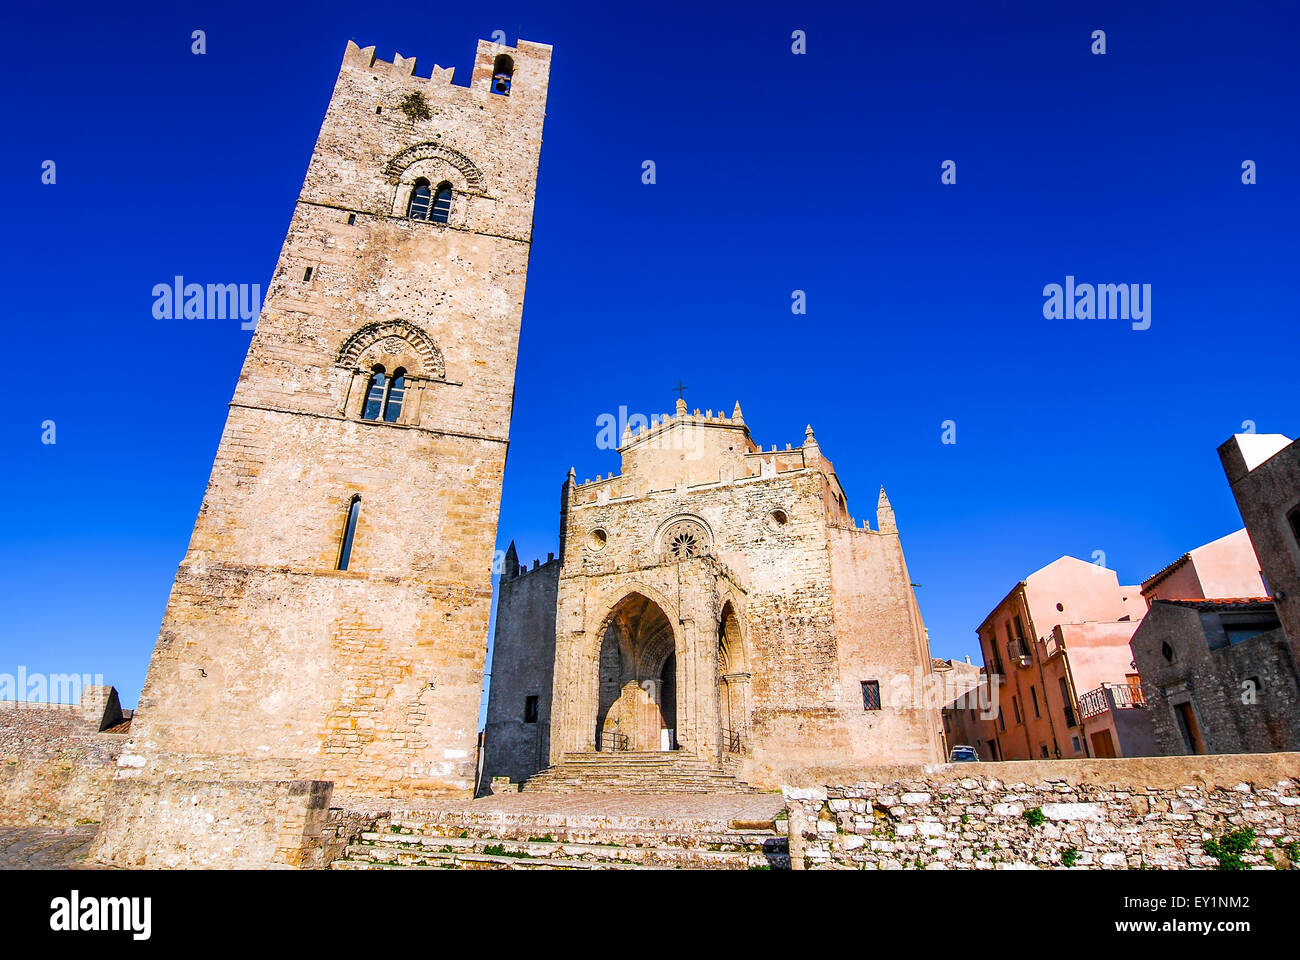 Erice, Sicily. Chiesa Madre (Matrice), Cathedral of Erix dedicated to Our Lady of the Assumption built in 1314, Italy. Stock Photo